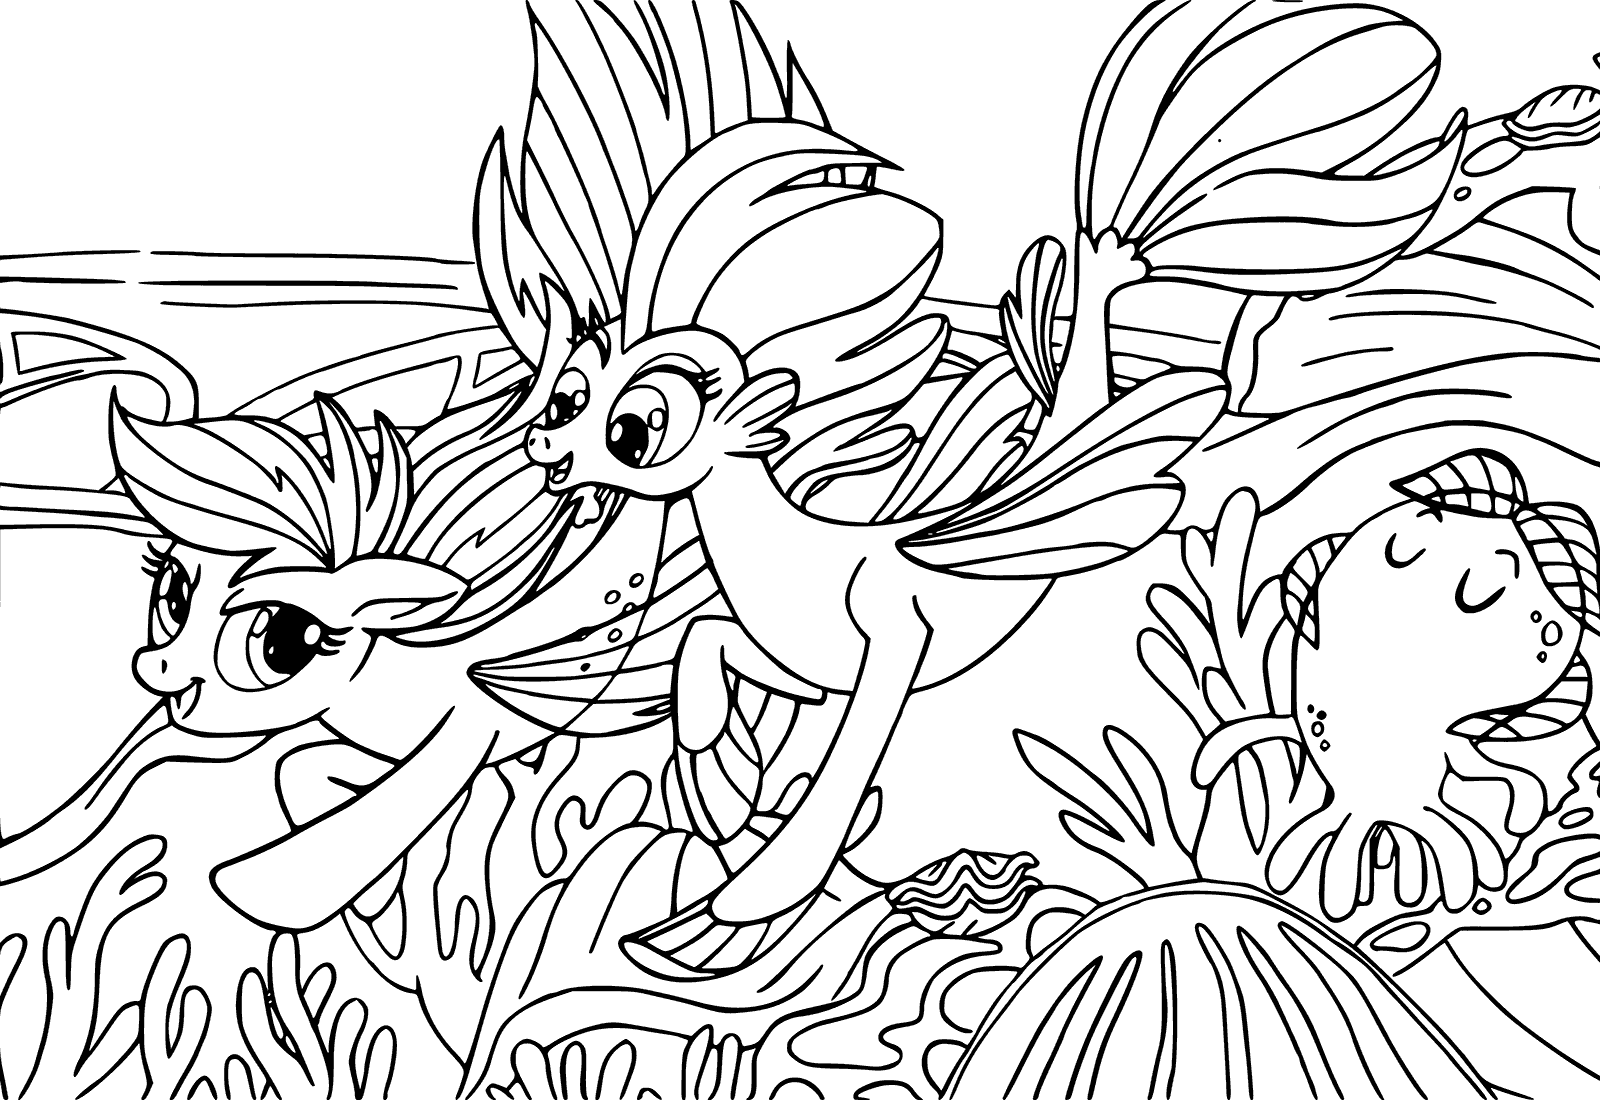 My Little Pony The Movie coloring pages to download and print for free